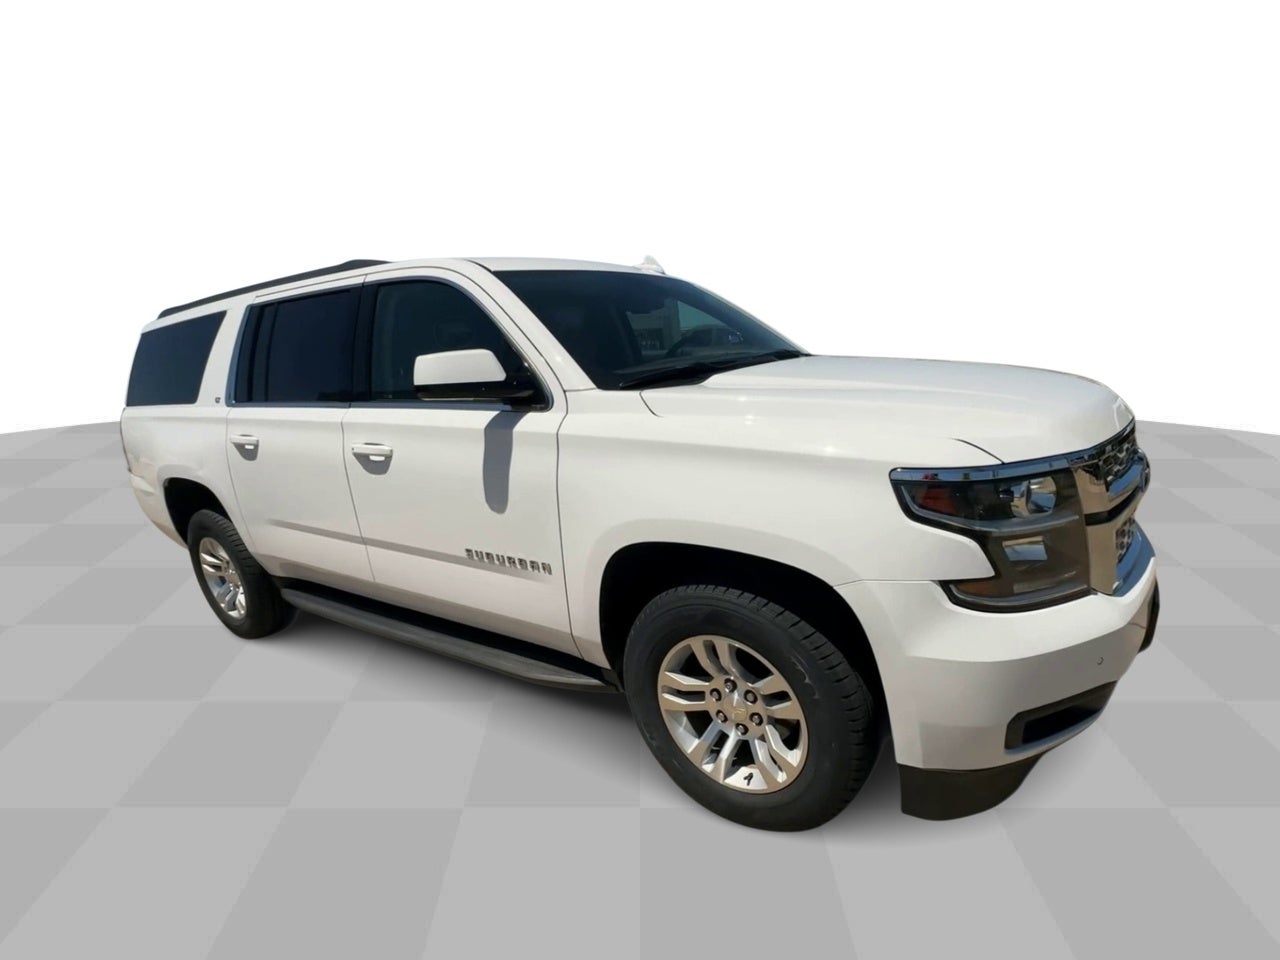 Used 2020 Chevrolet Suburban LT with VIN 1GNSCHKC5LR226273 for sale in Katy, TX